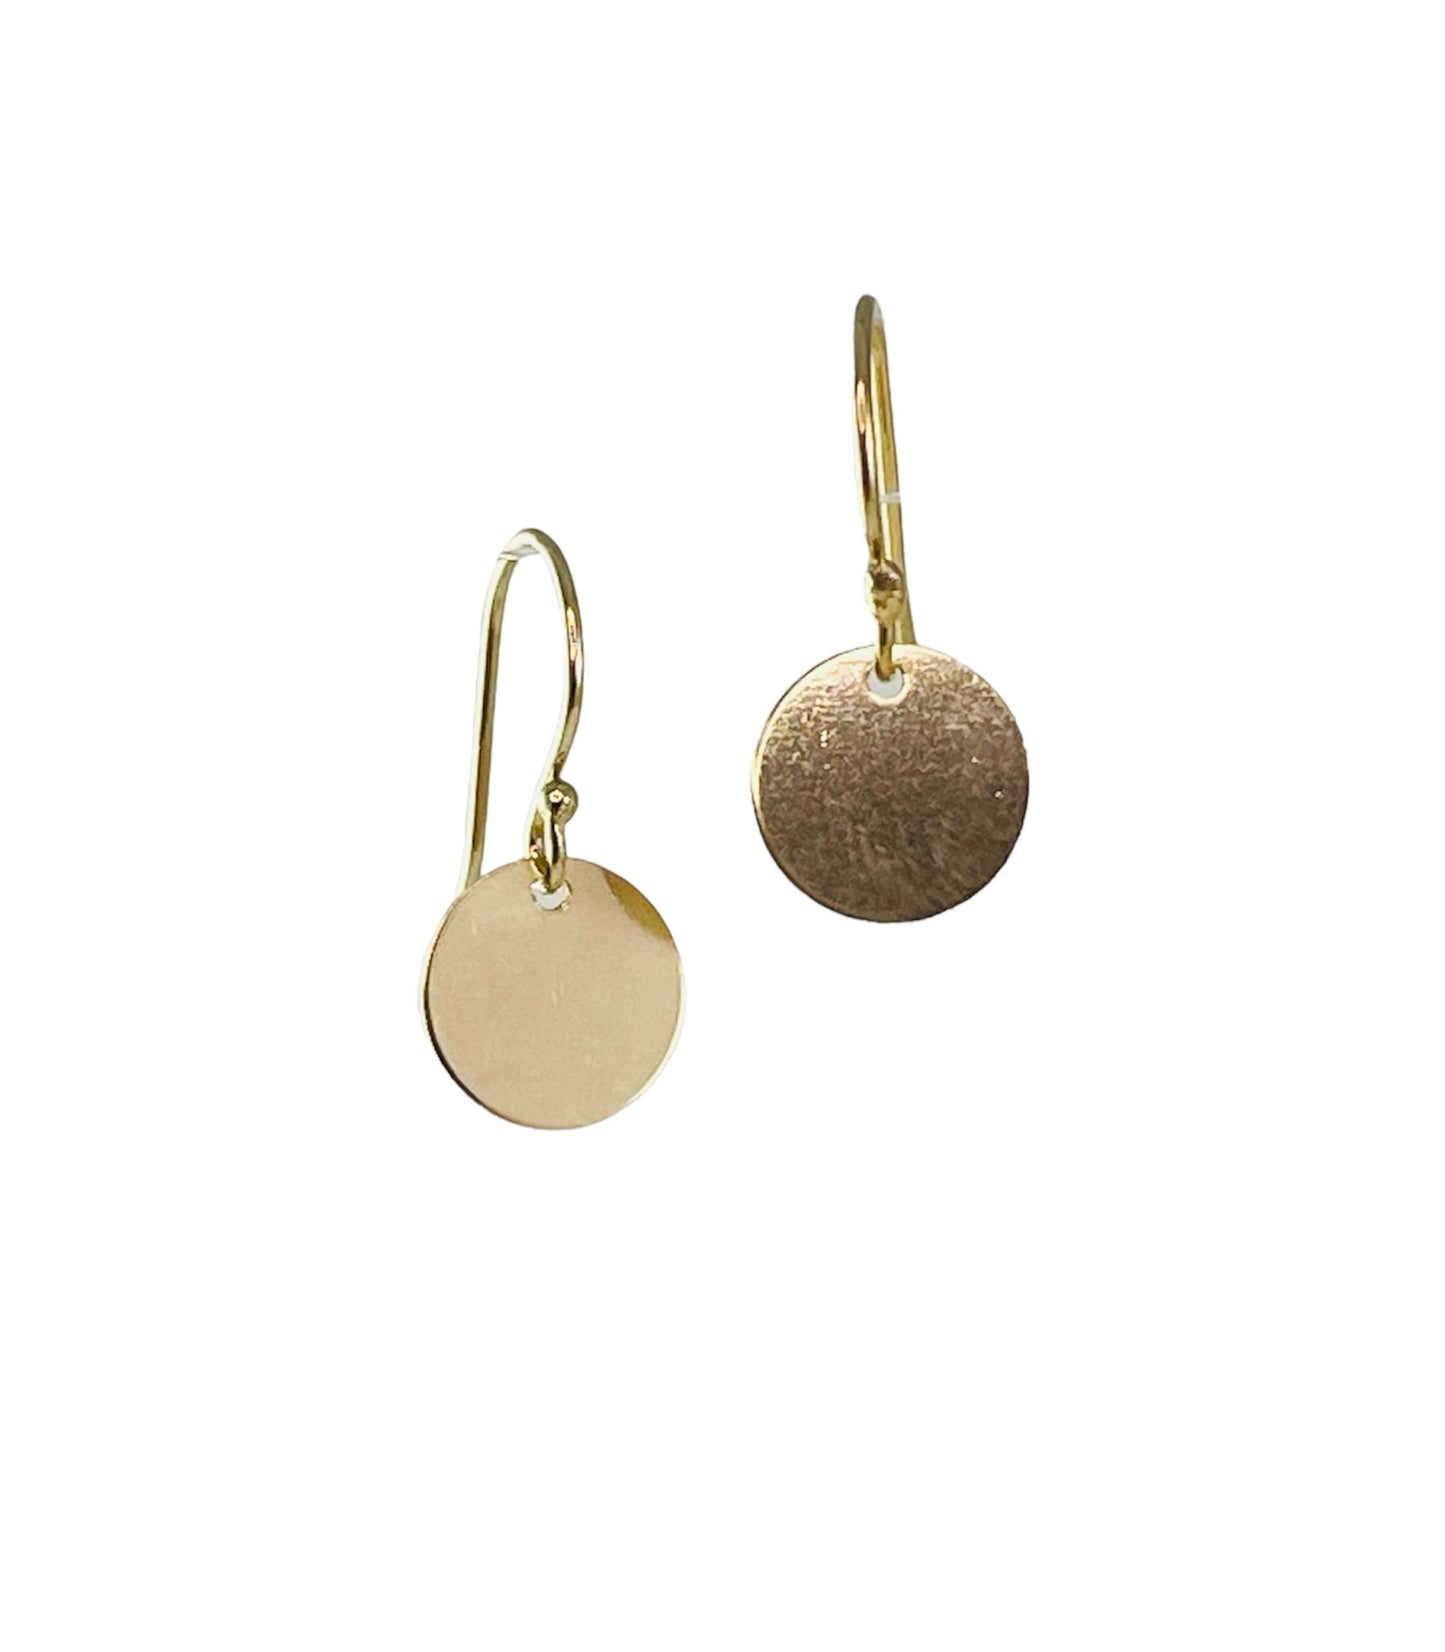 Tiny Gold Sequin Disc Earrings,Golden Disc Earrings,Small Gold Circle Earrings,Minimalist Gold Earrings,14k Gold Filled Disc Dangle Earrings